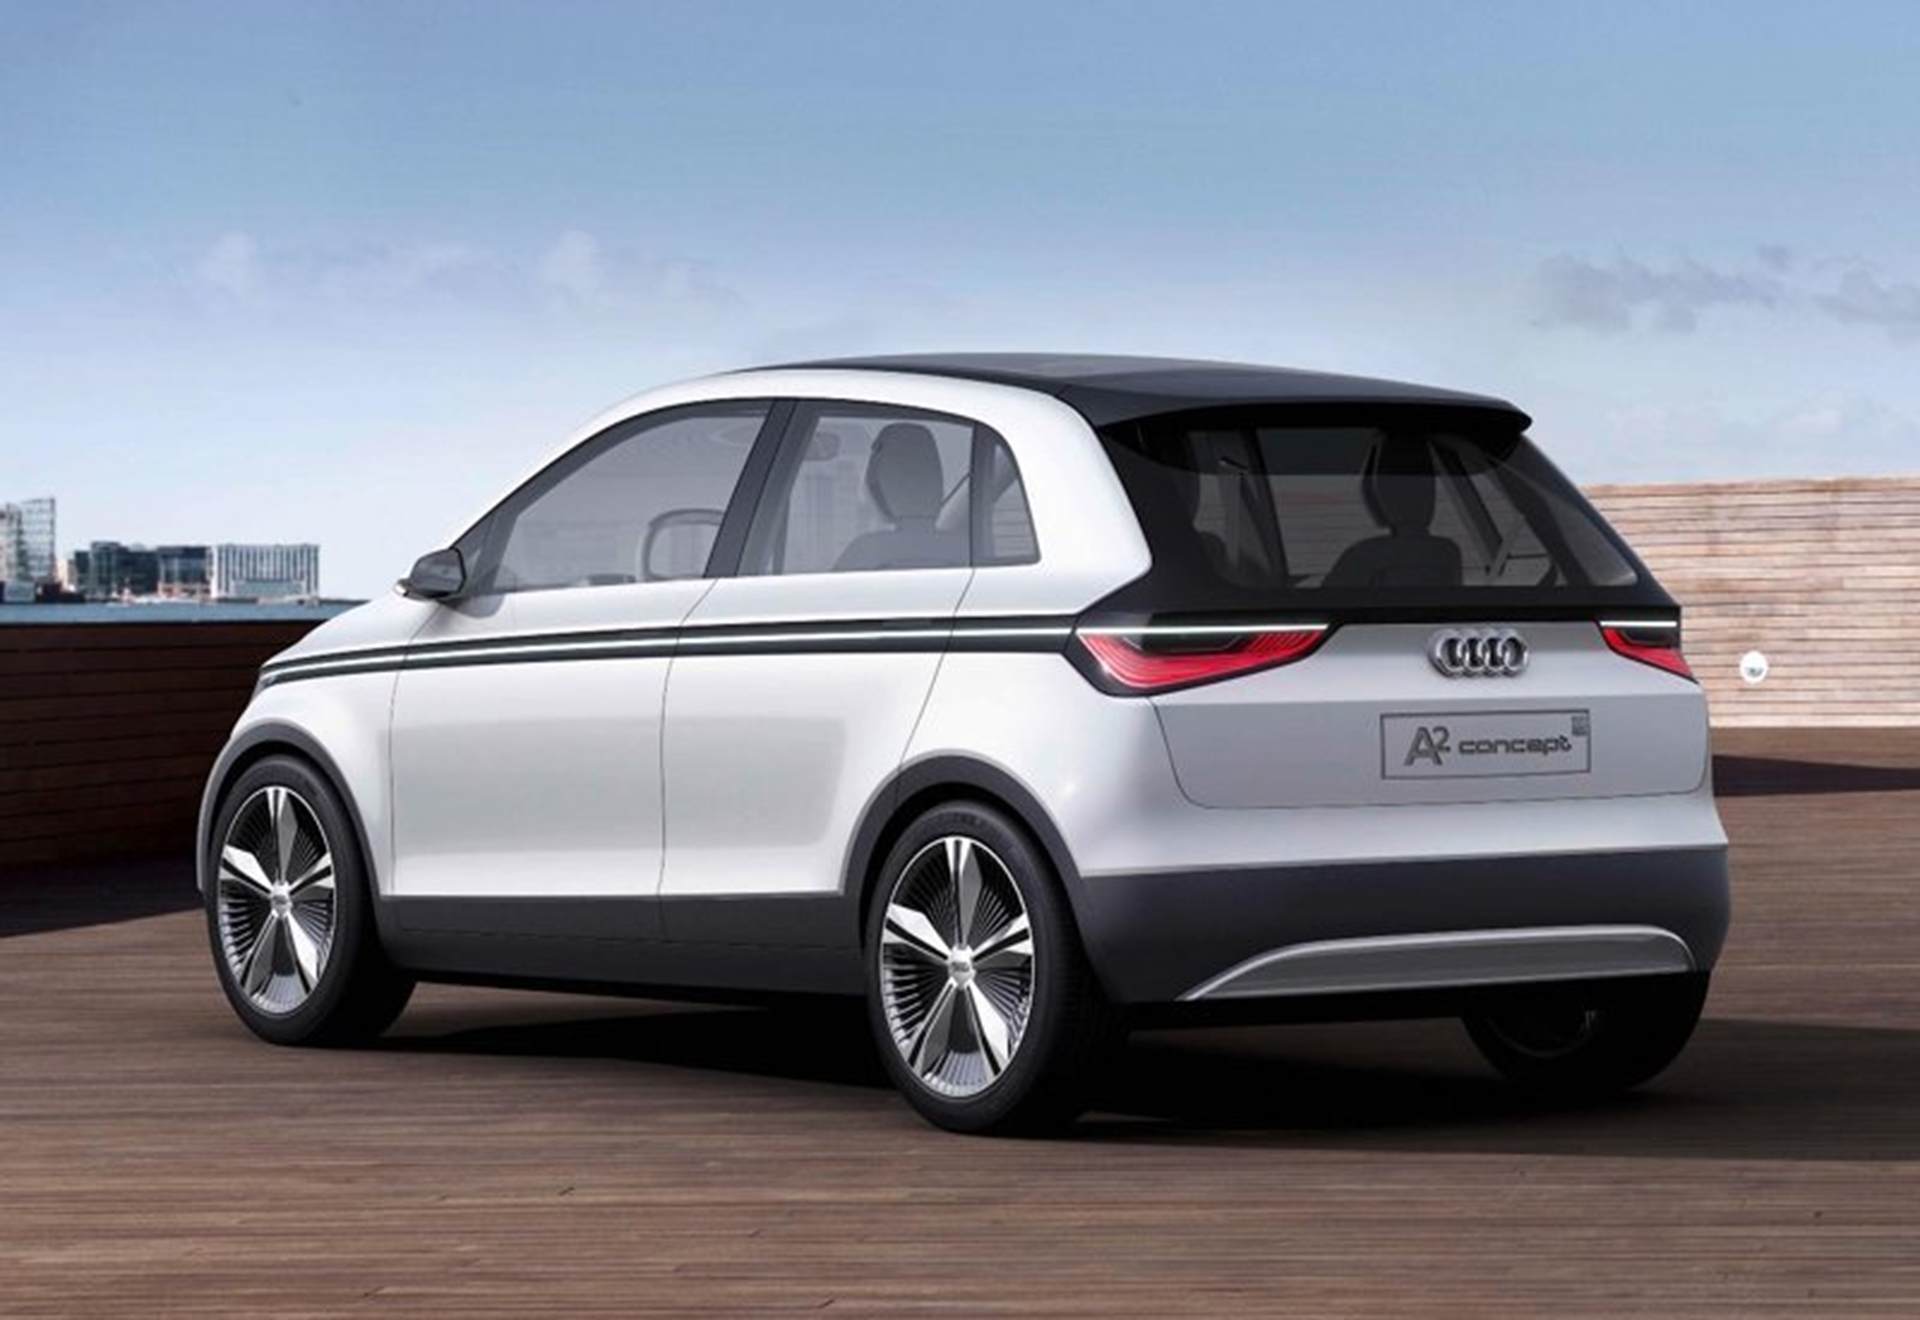 The Audi A2 concept – premium-class space concept with by-wire technology